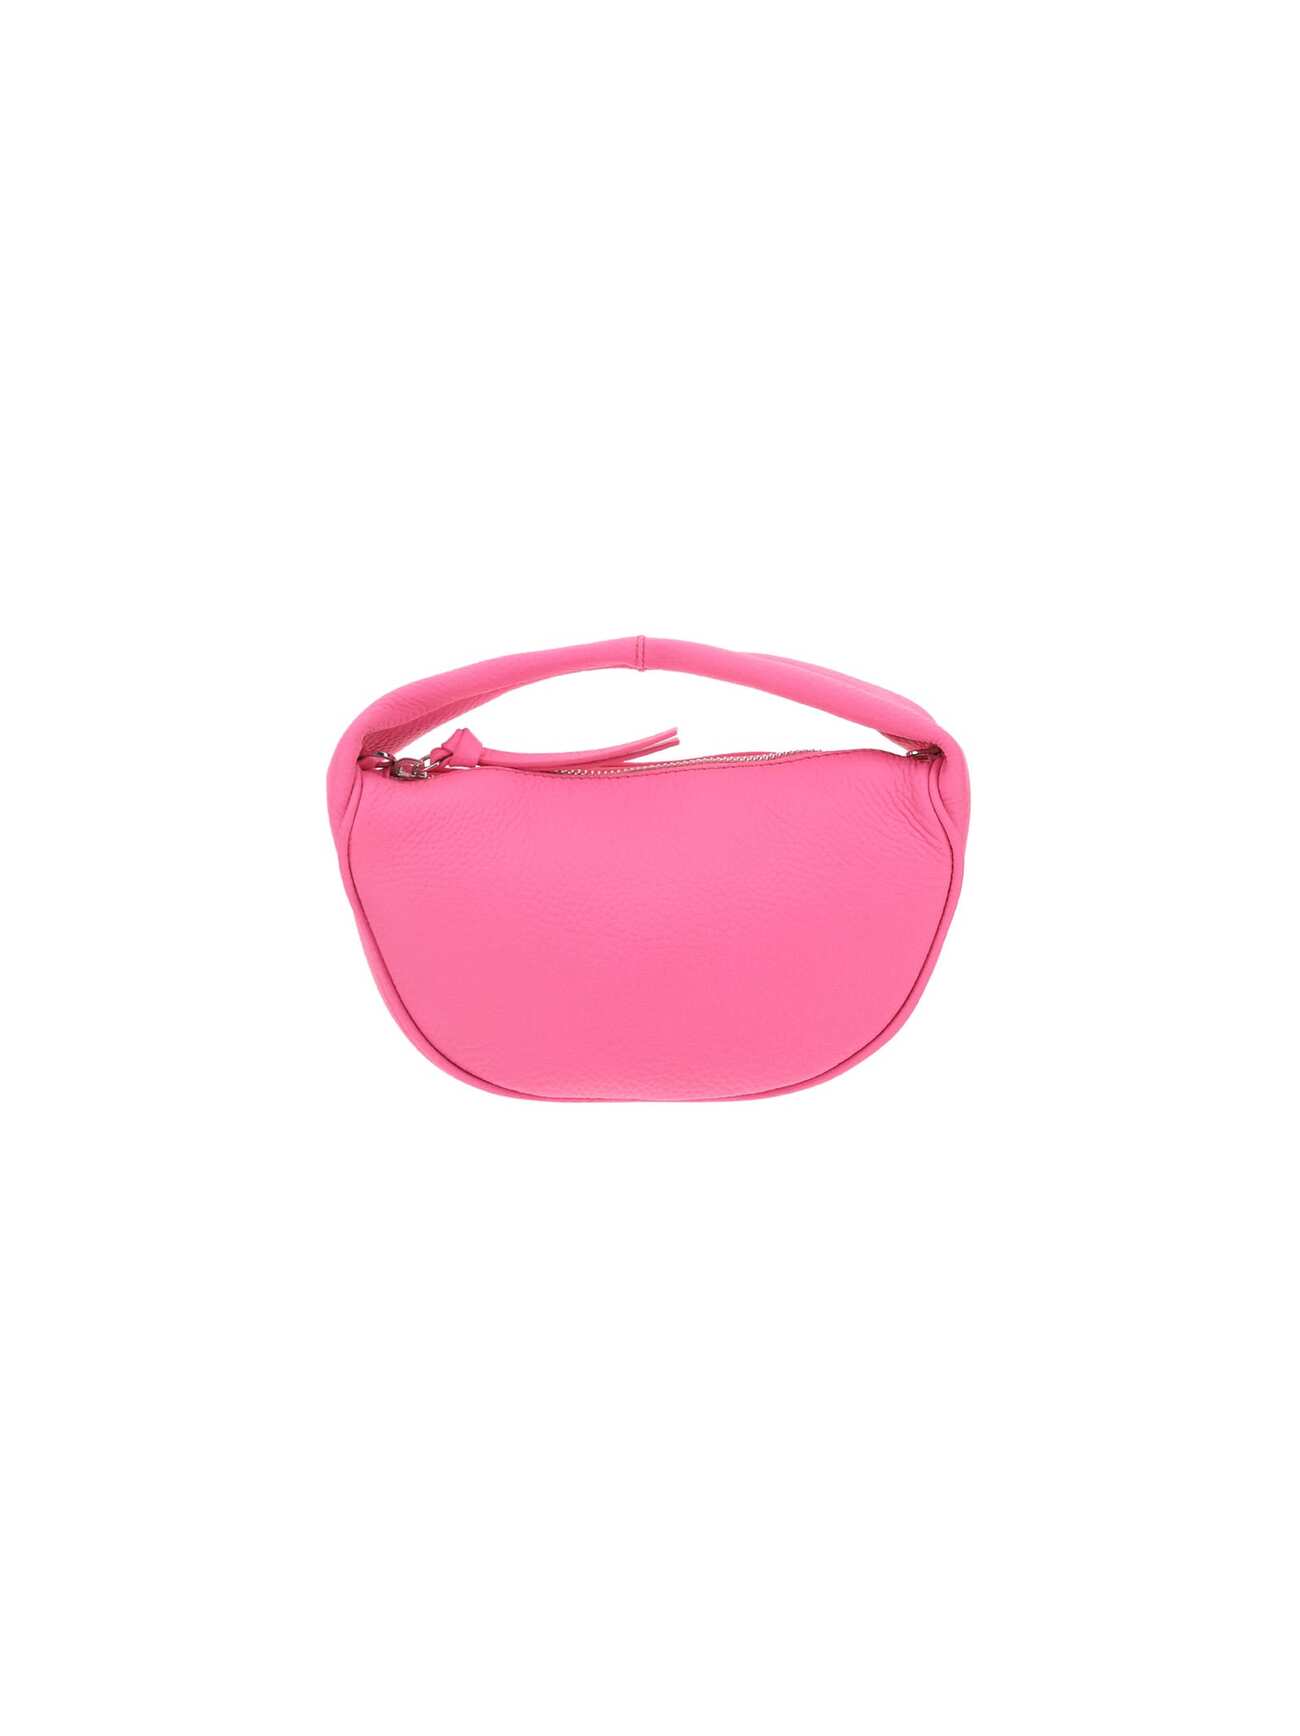 BY FAR Baby Cush Bag in pink